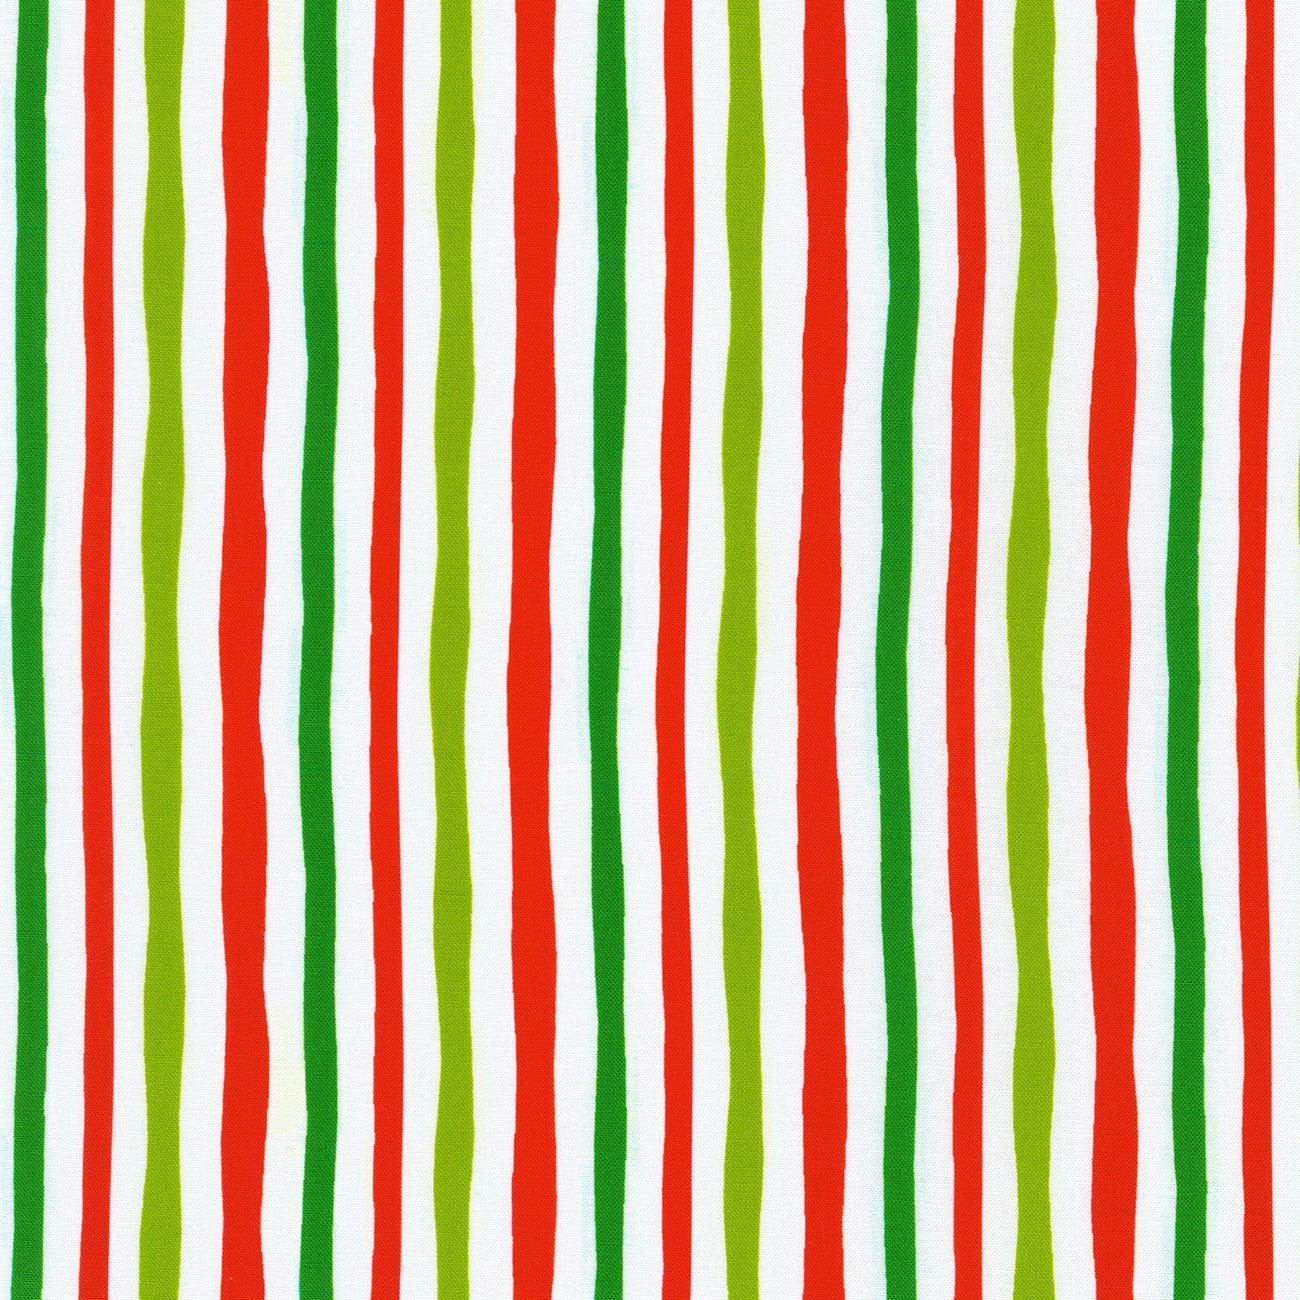 How the Grinch Stole Christmas Multi Stripes Fabric-Robert Kaufman-My Favorite Quilt Store